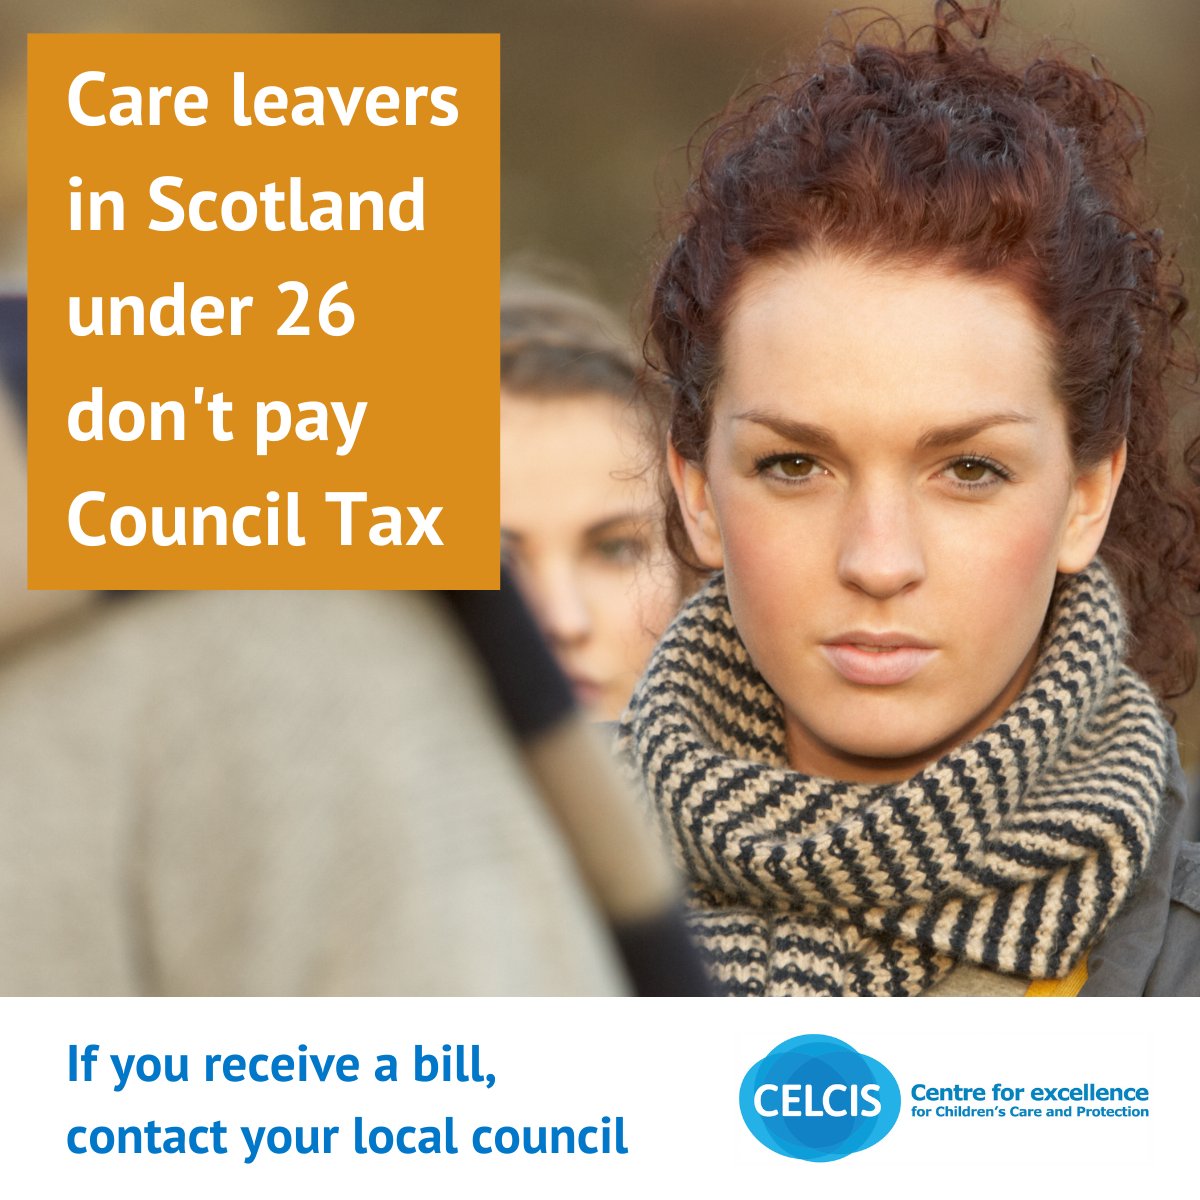 Young care leavers in Scotland don't pay Council Tax. If you are sent a bill contact your local council for exemption. #CouncilTax